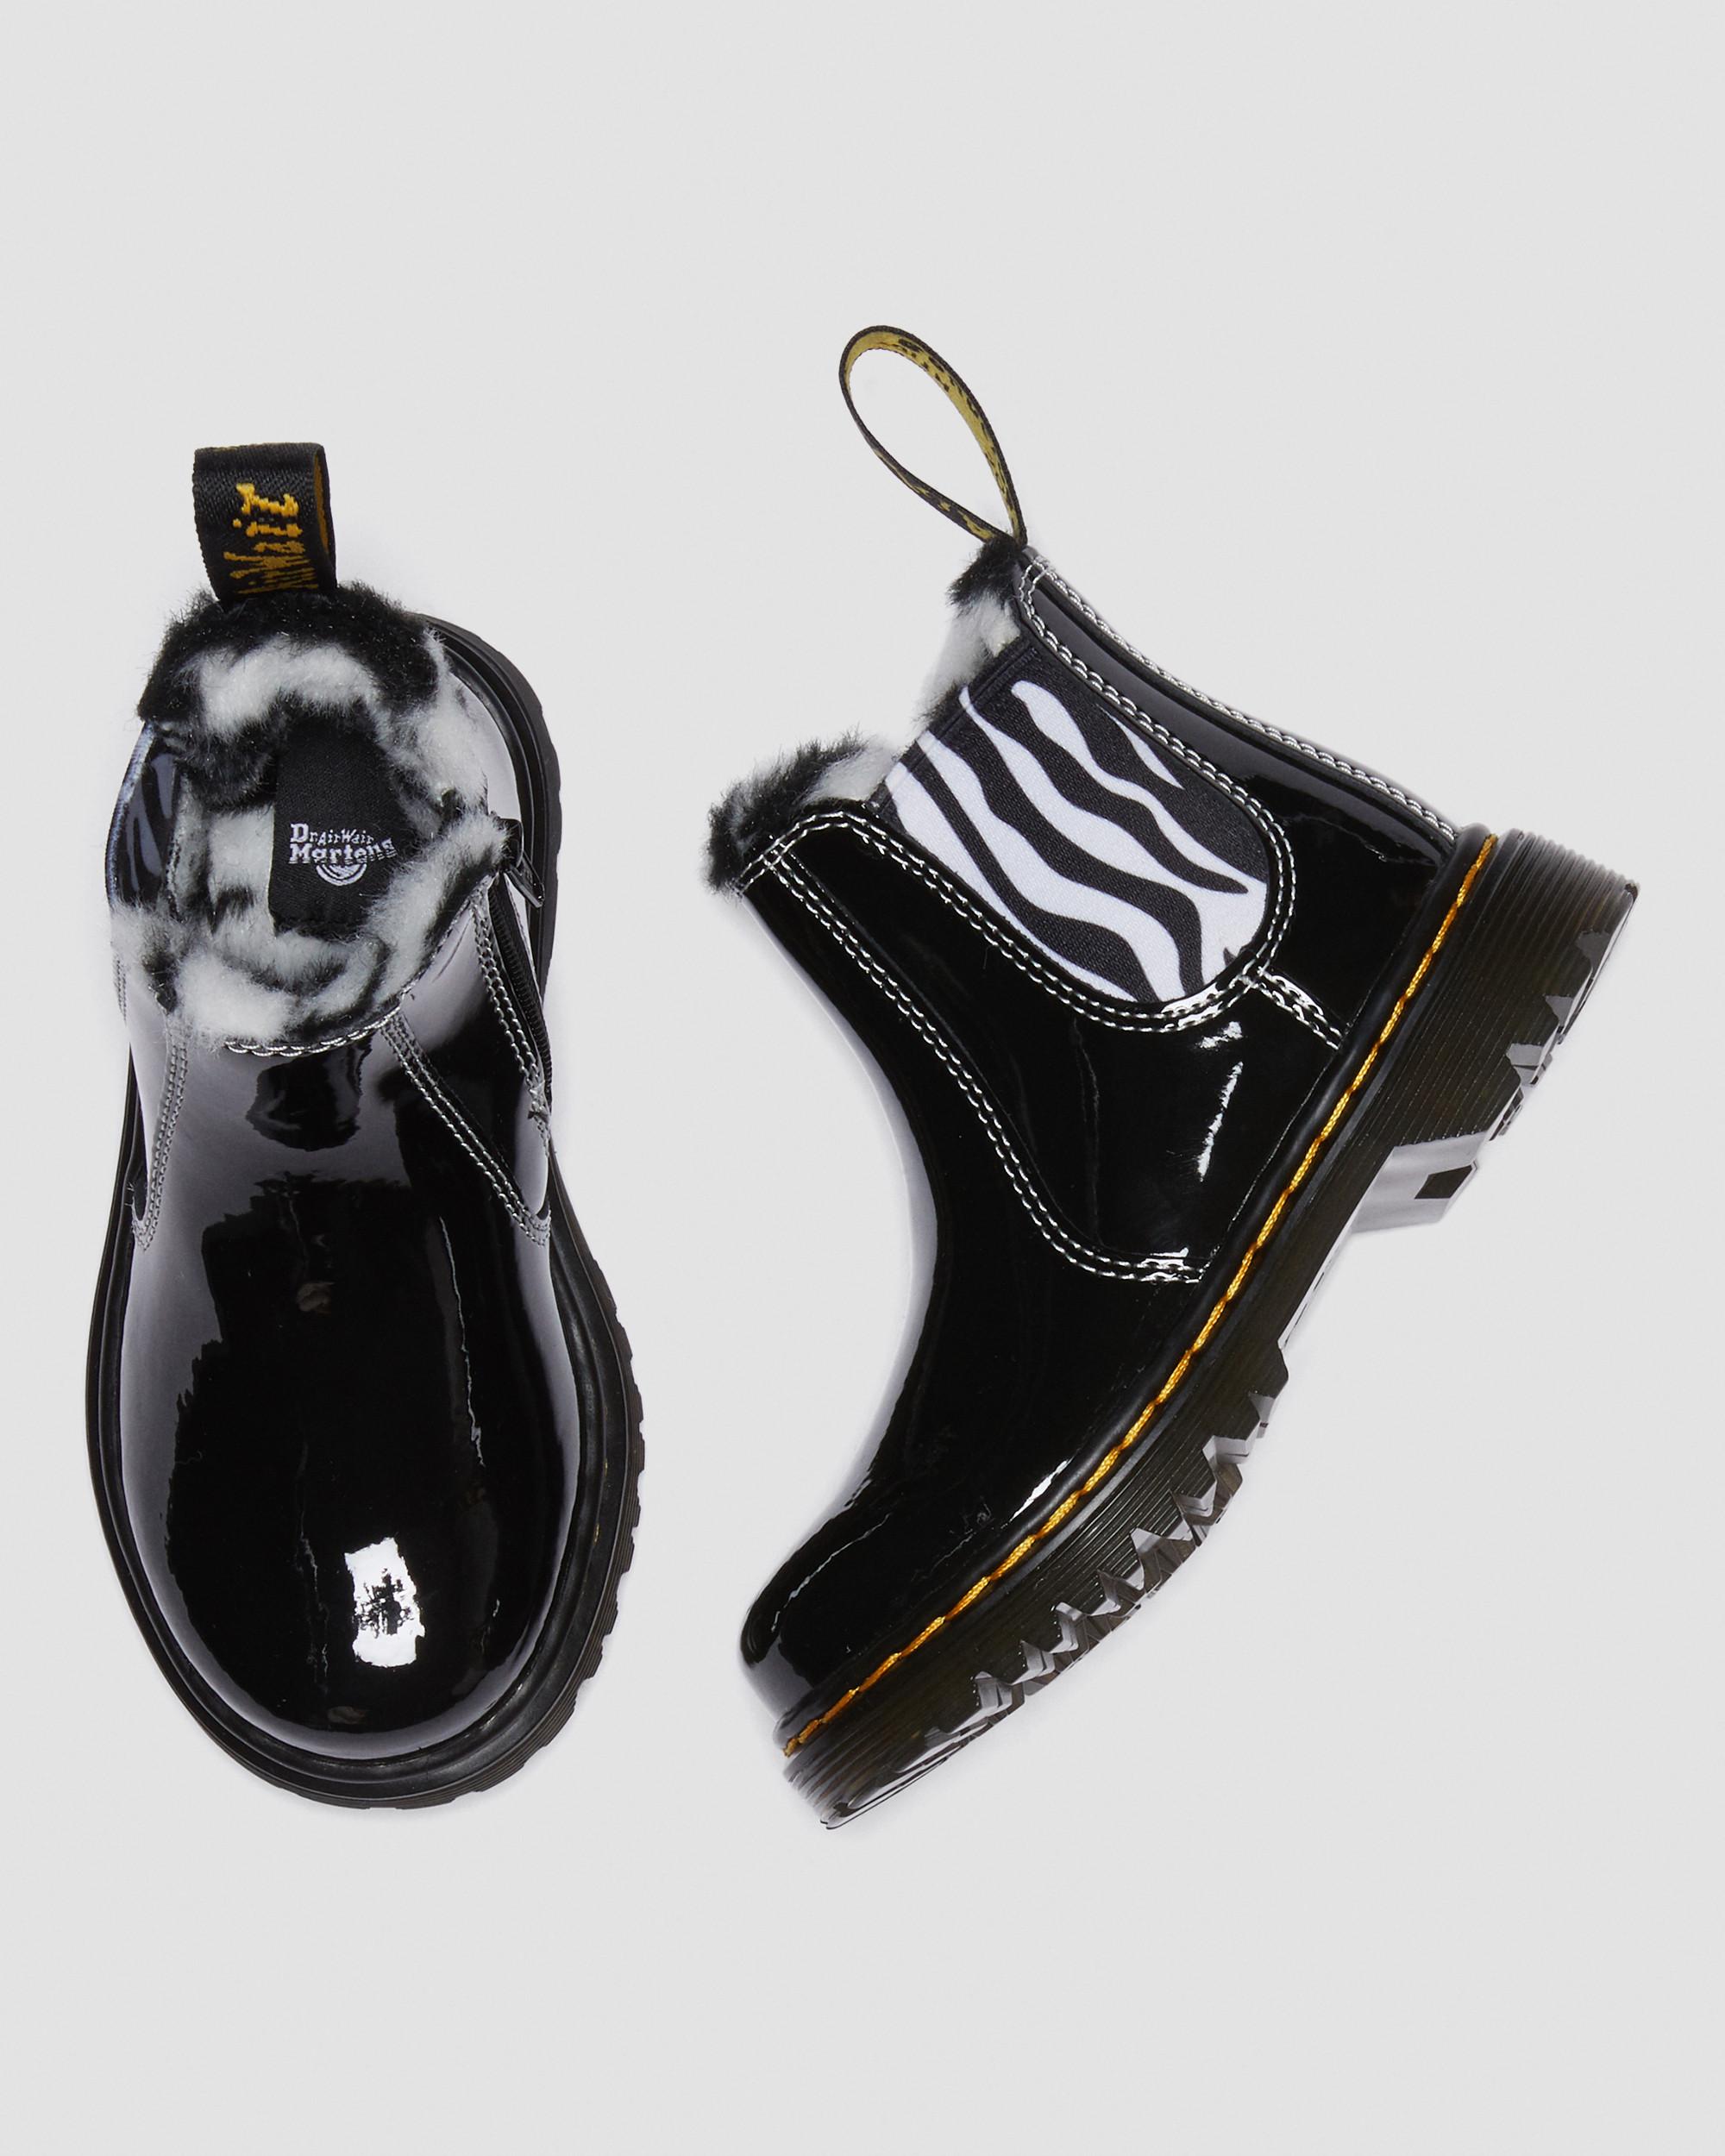 Toddler 2976 Leonore Patent Leather Chelsea BootsToddler 2976 Leonore Patent Leather Chelsea Boots Dr. Martens